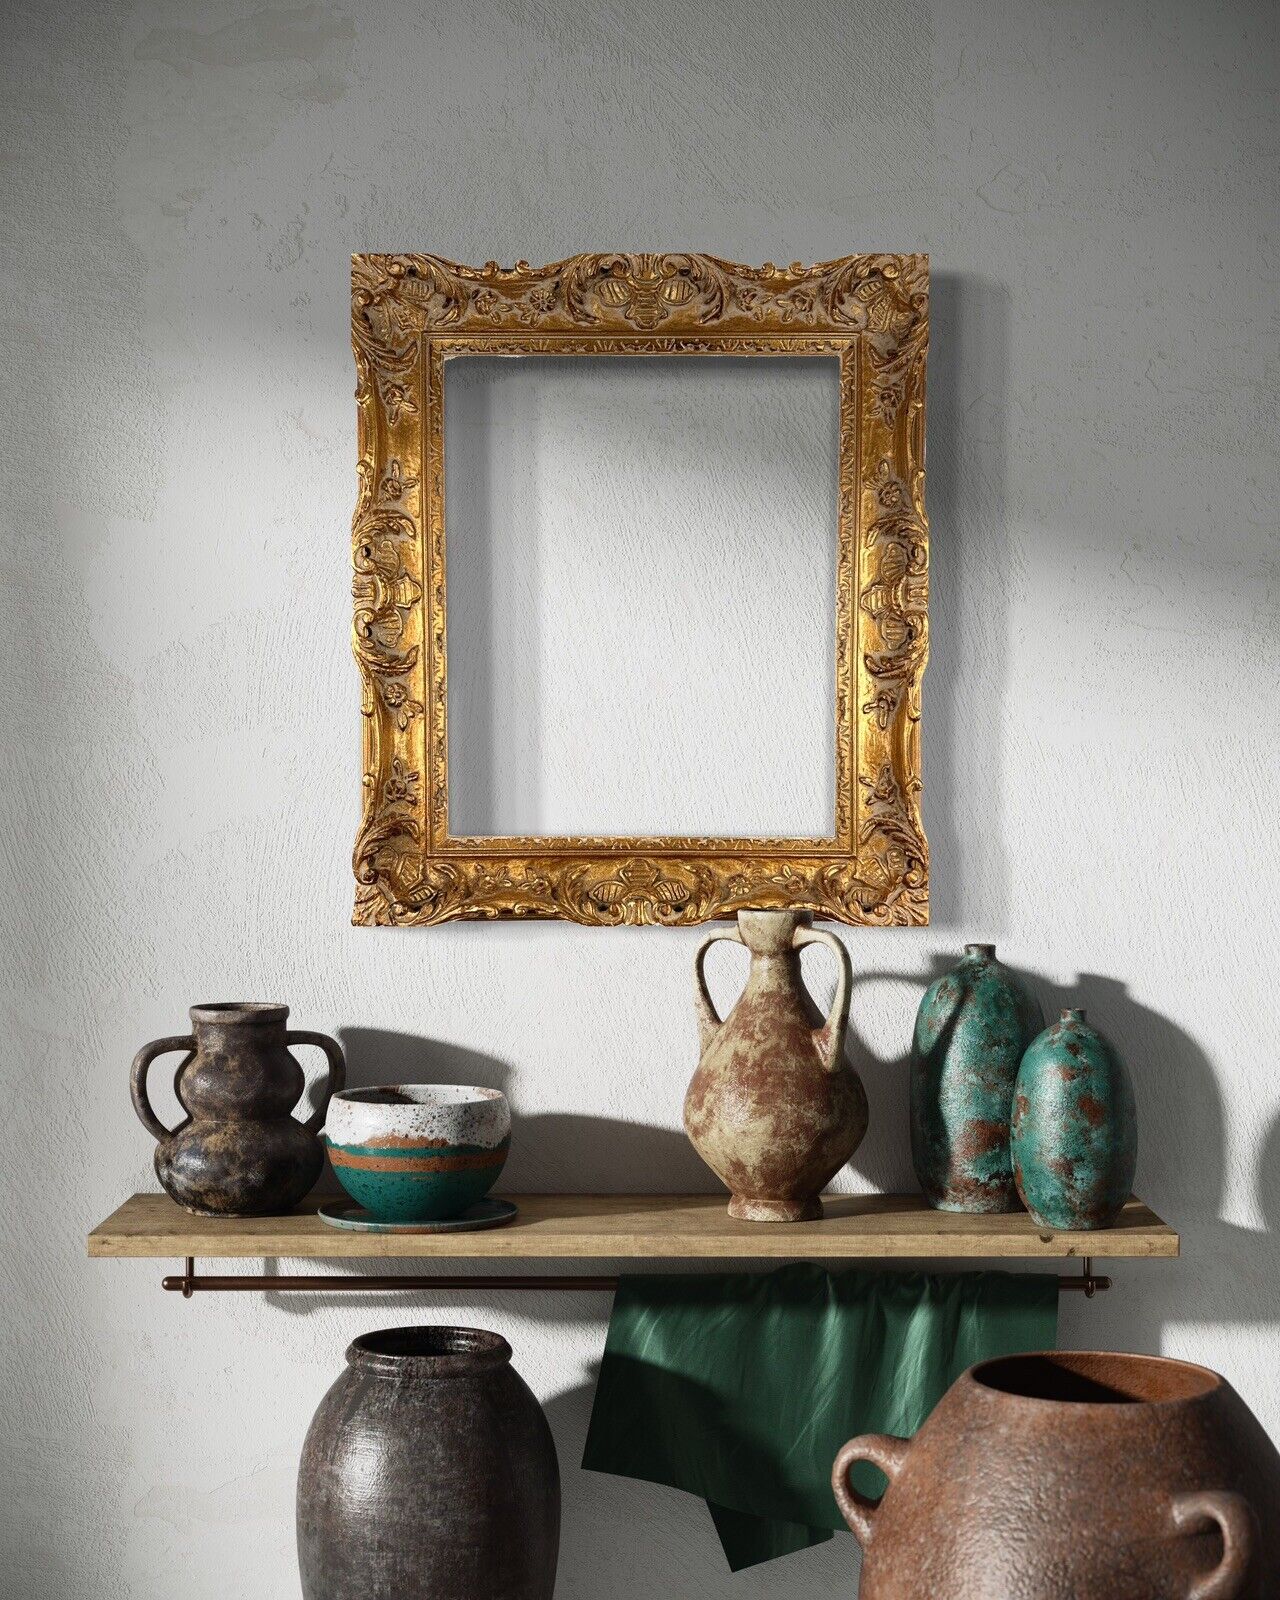 Ornate Gold Frame For Canvas Or Mirror.